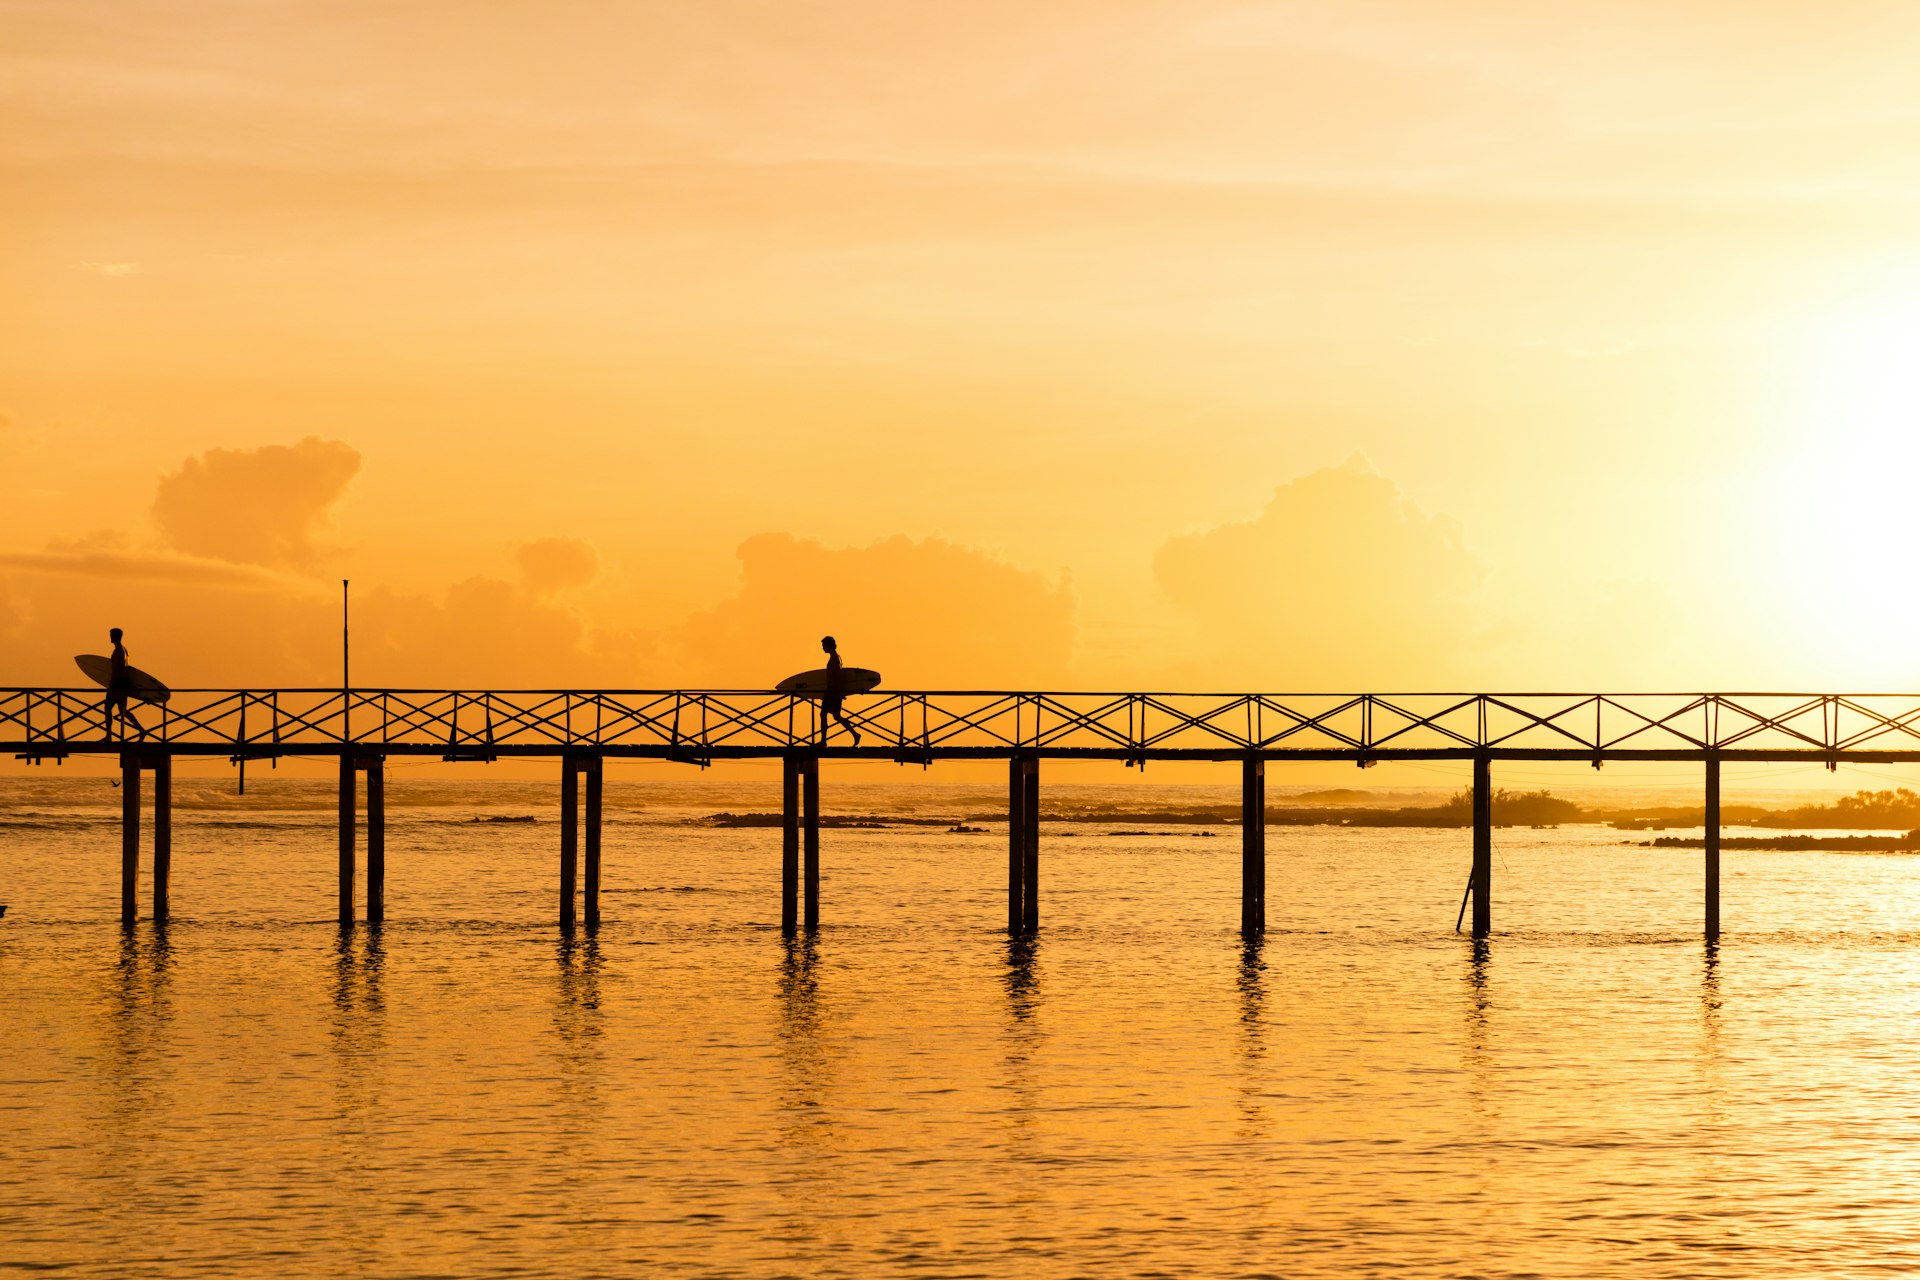 Two people walk across the famous Cloud 9 surf boardwalk in Siargao, the Philippines. The silhouette of the two men is cast against an orange sky with the sun setting.